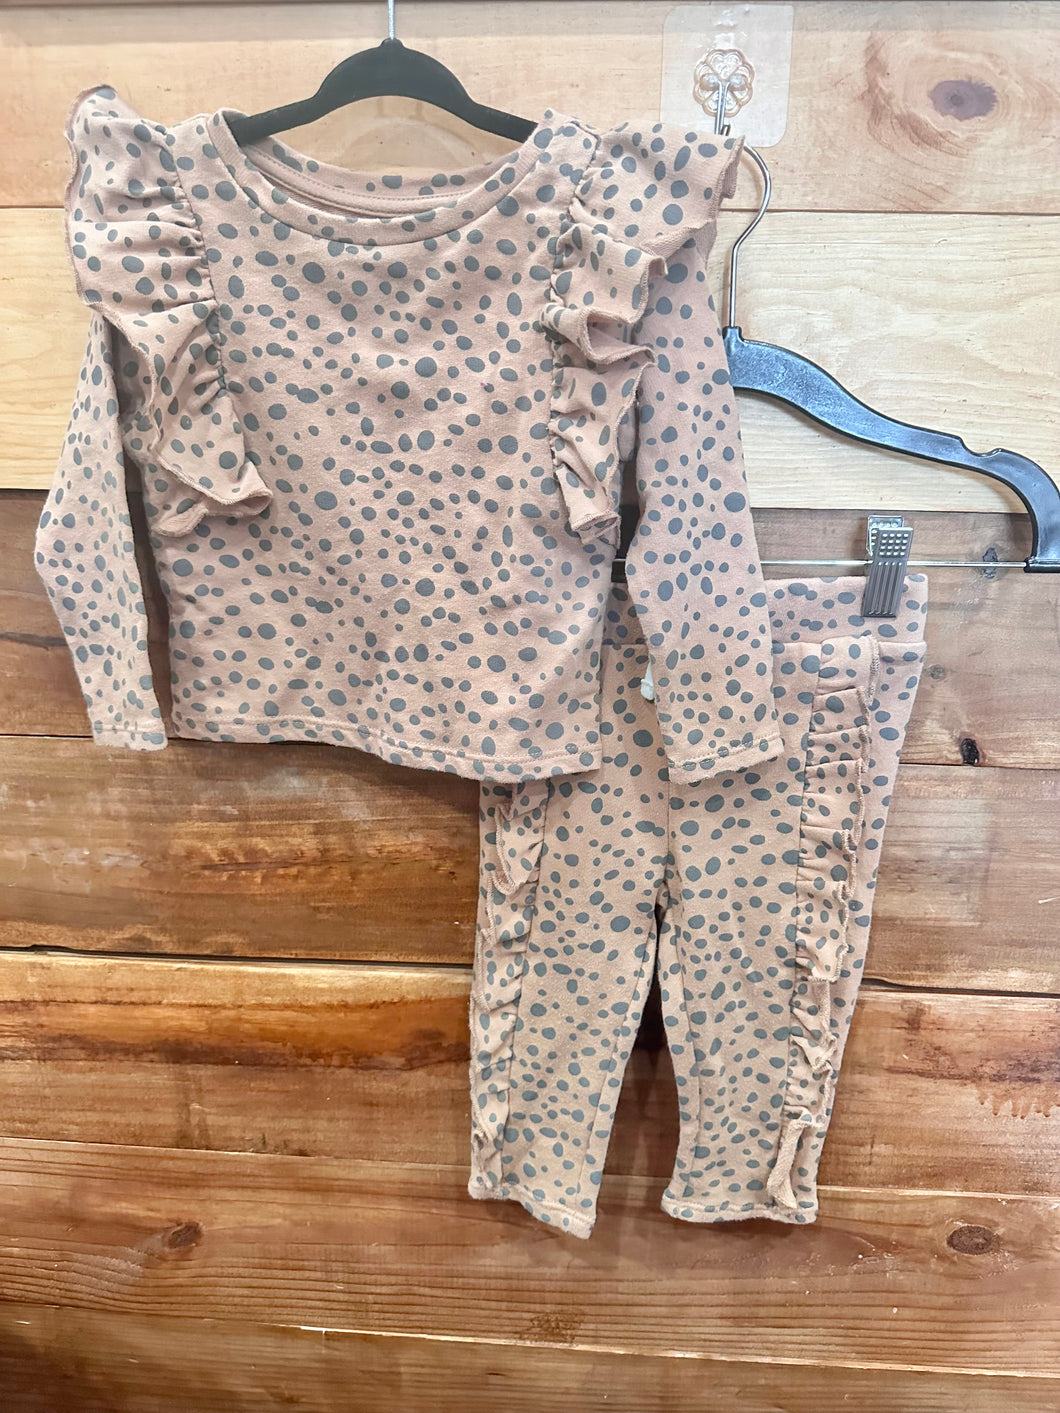 Grayson Mini Brown Dotted 2pc Outfit Size 18m